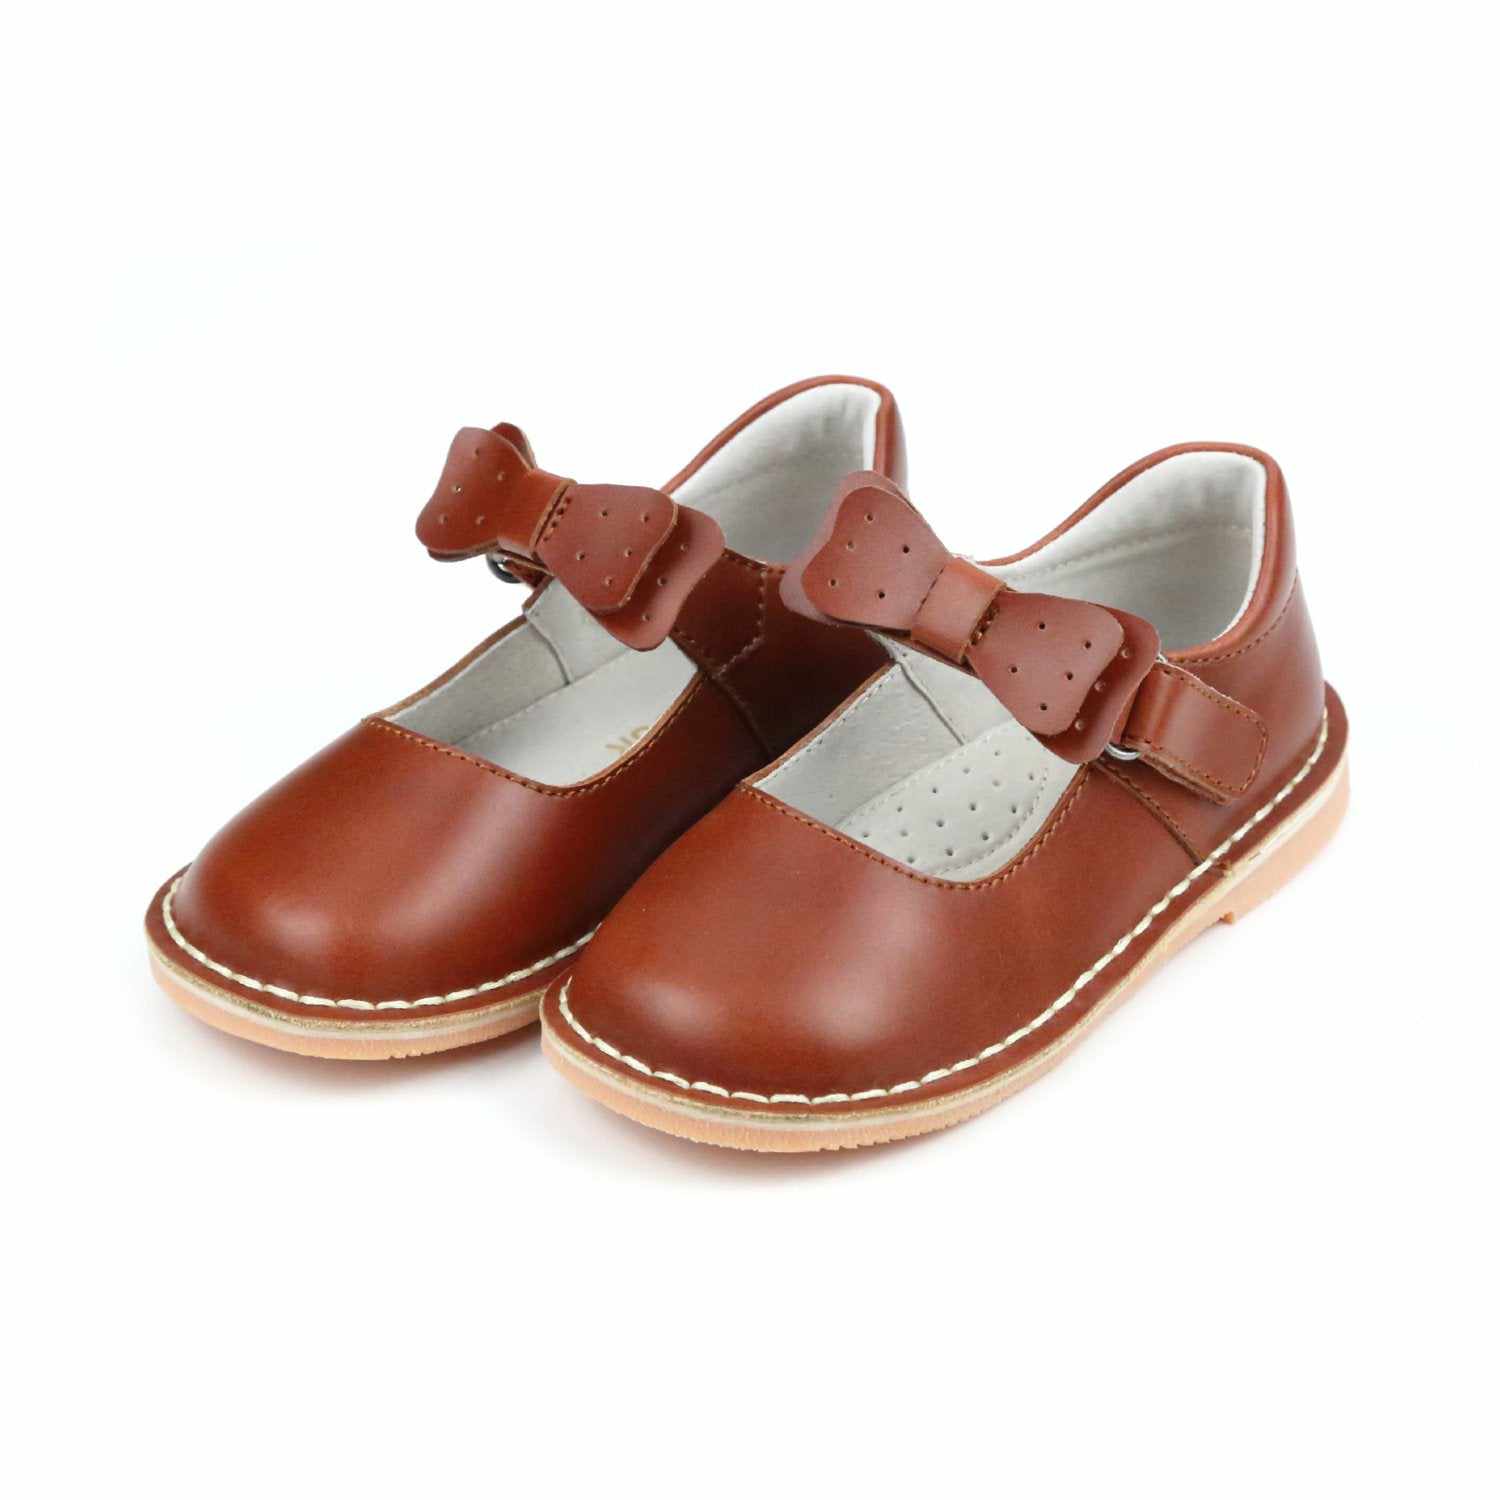 L'Amour Iris Bow Strap Mary Jane in Cognac